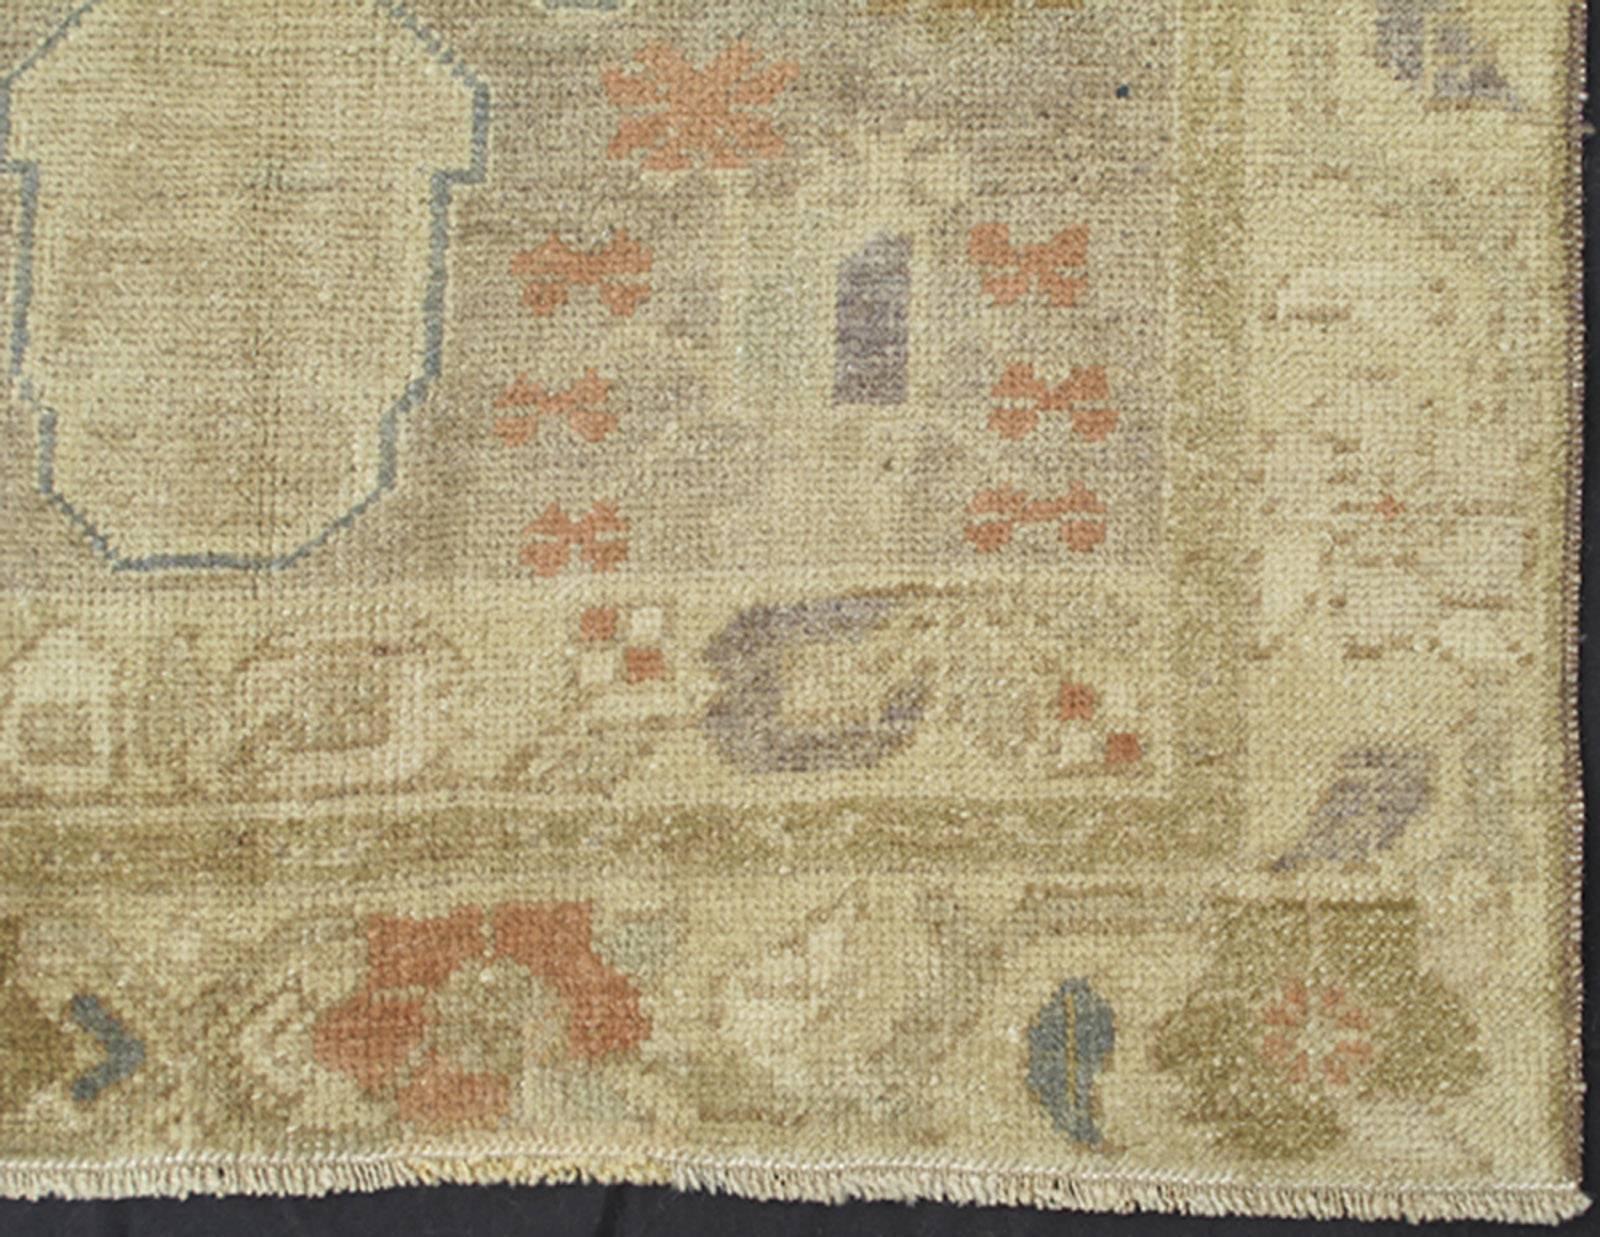 Vintage Turkish Oushak Runner with dual medallions and faint red and blue accents, rug mtu-95054, country of origin / type: Turkey / Oushak, circa mid-20th century.

This vintage Turkish Oushak carpet (circa mid-20th century) features a central